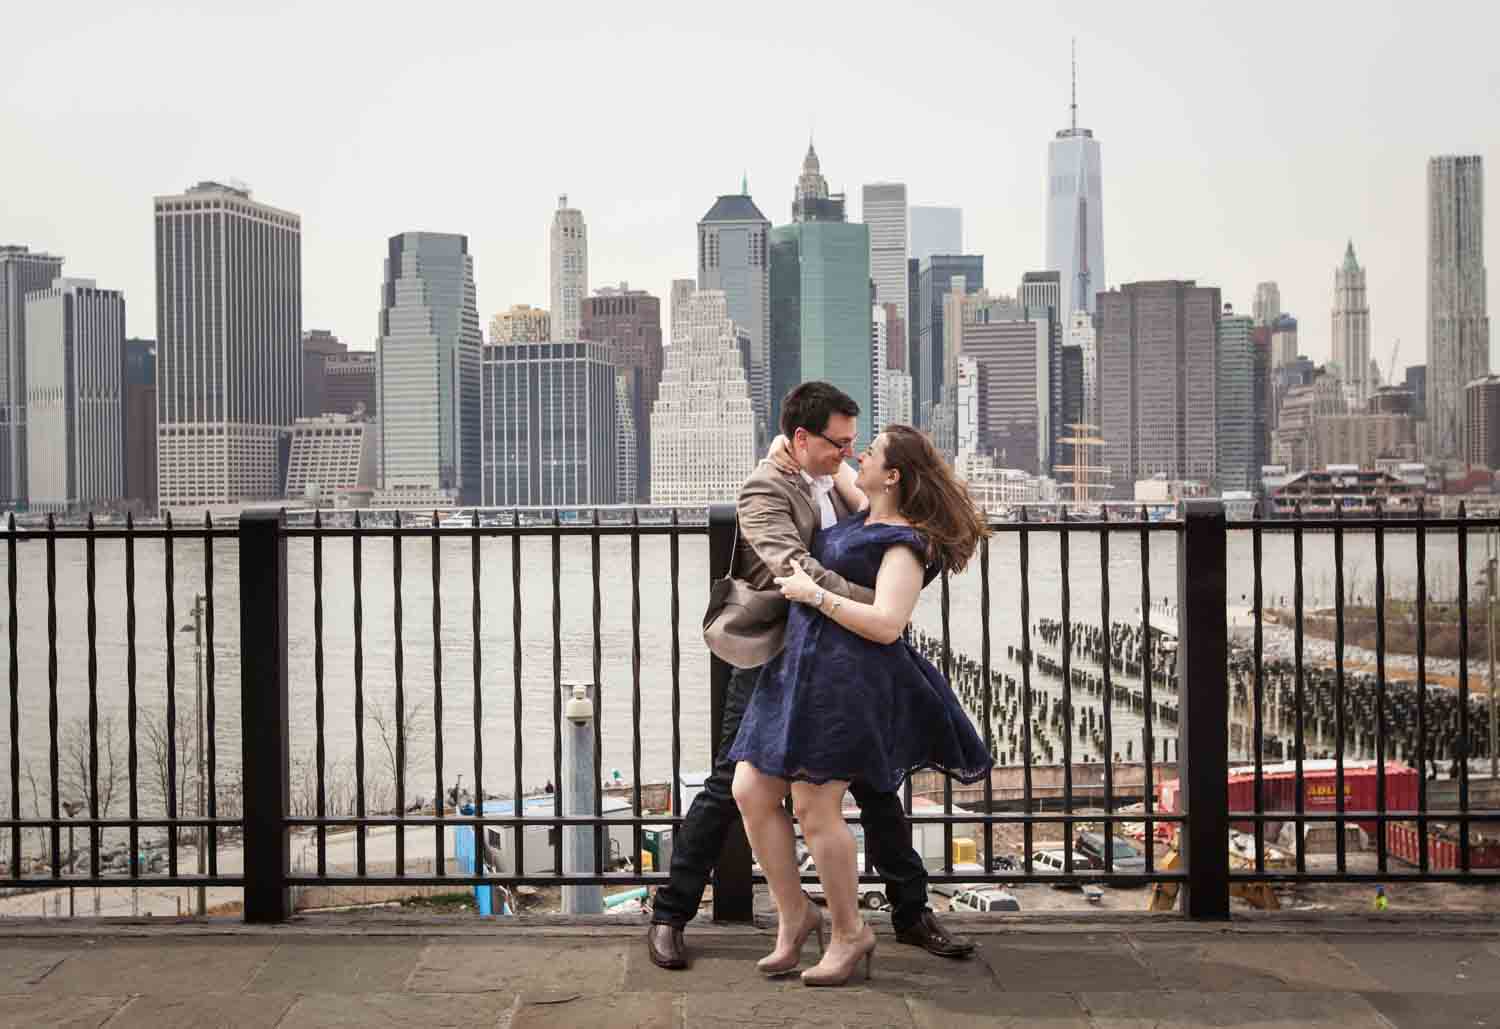 Couple dancing on Brooklyn Promenade with NYC skyline in background